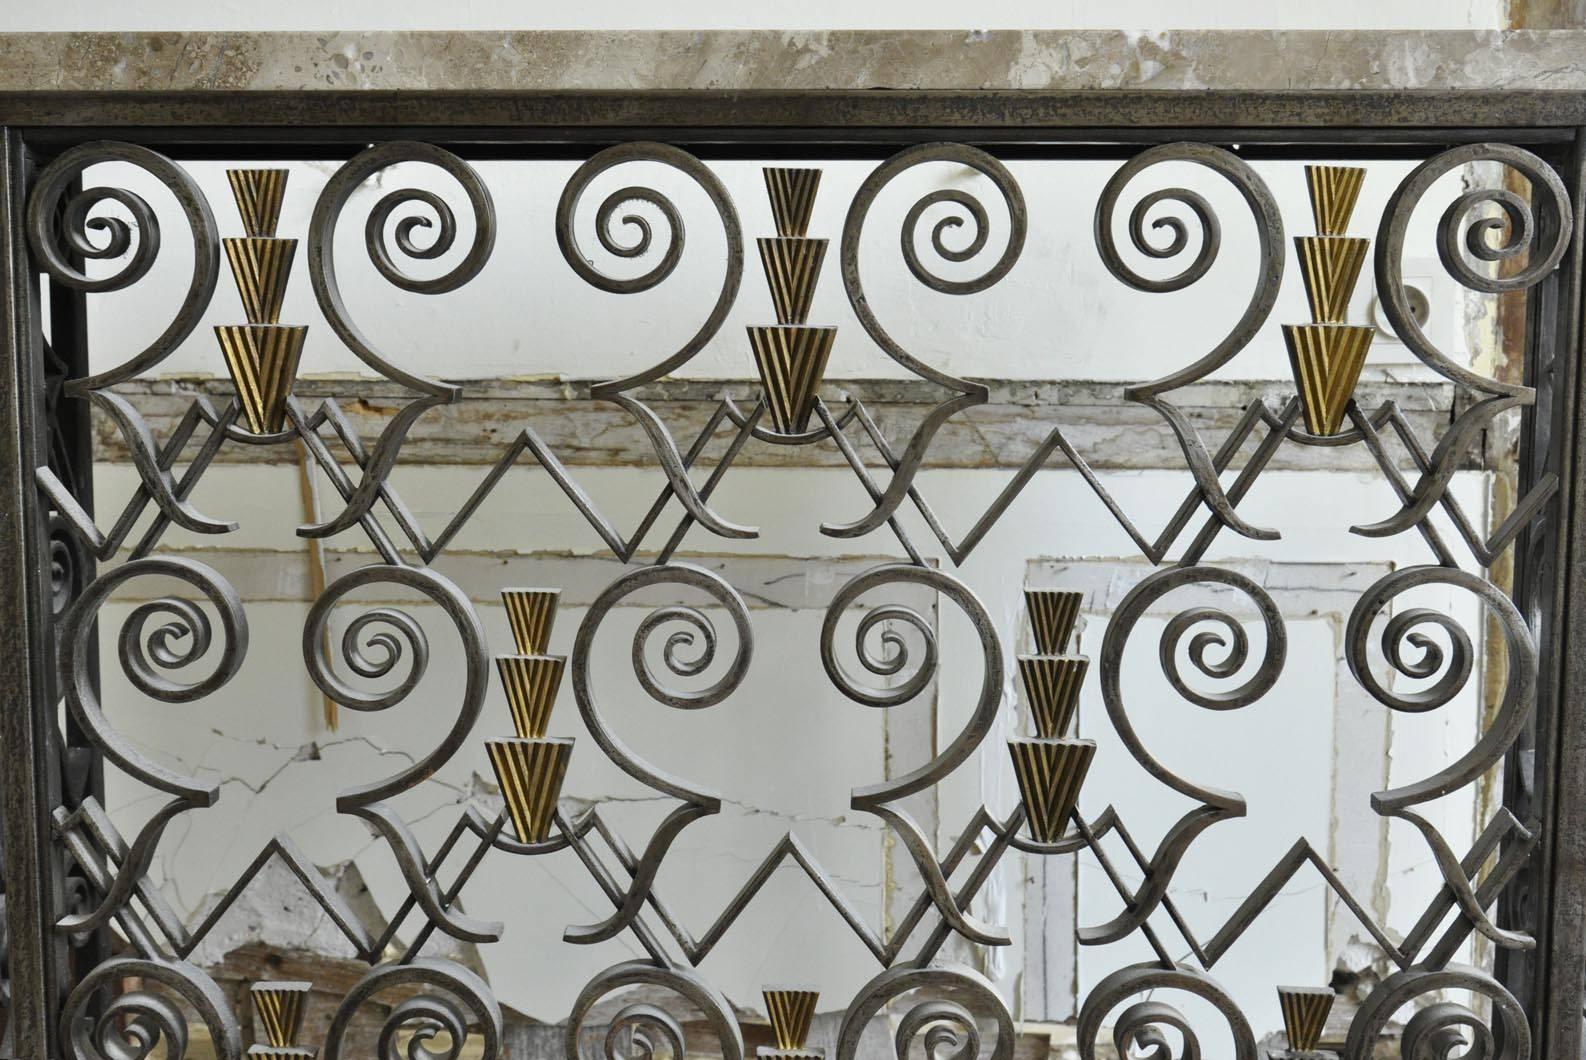 These three matching radiator covers in Art Deco style were made circa 1930.
The wrought ironwork is typical of the Art Deco style, with its geometric and symmetrical motifs, embellished with golden arrows. These are rare works that are very